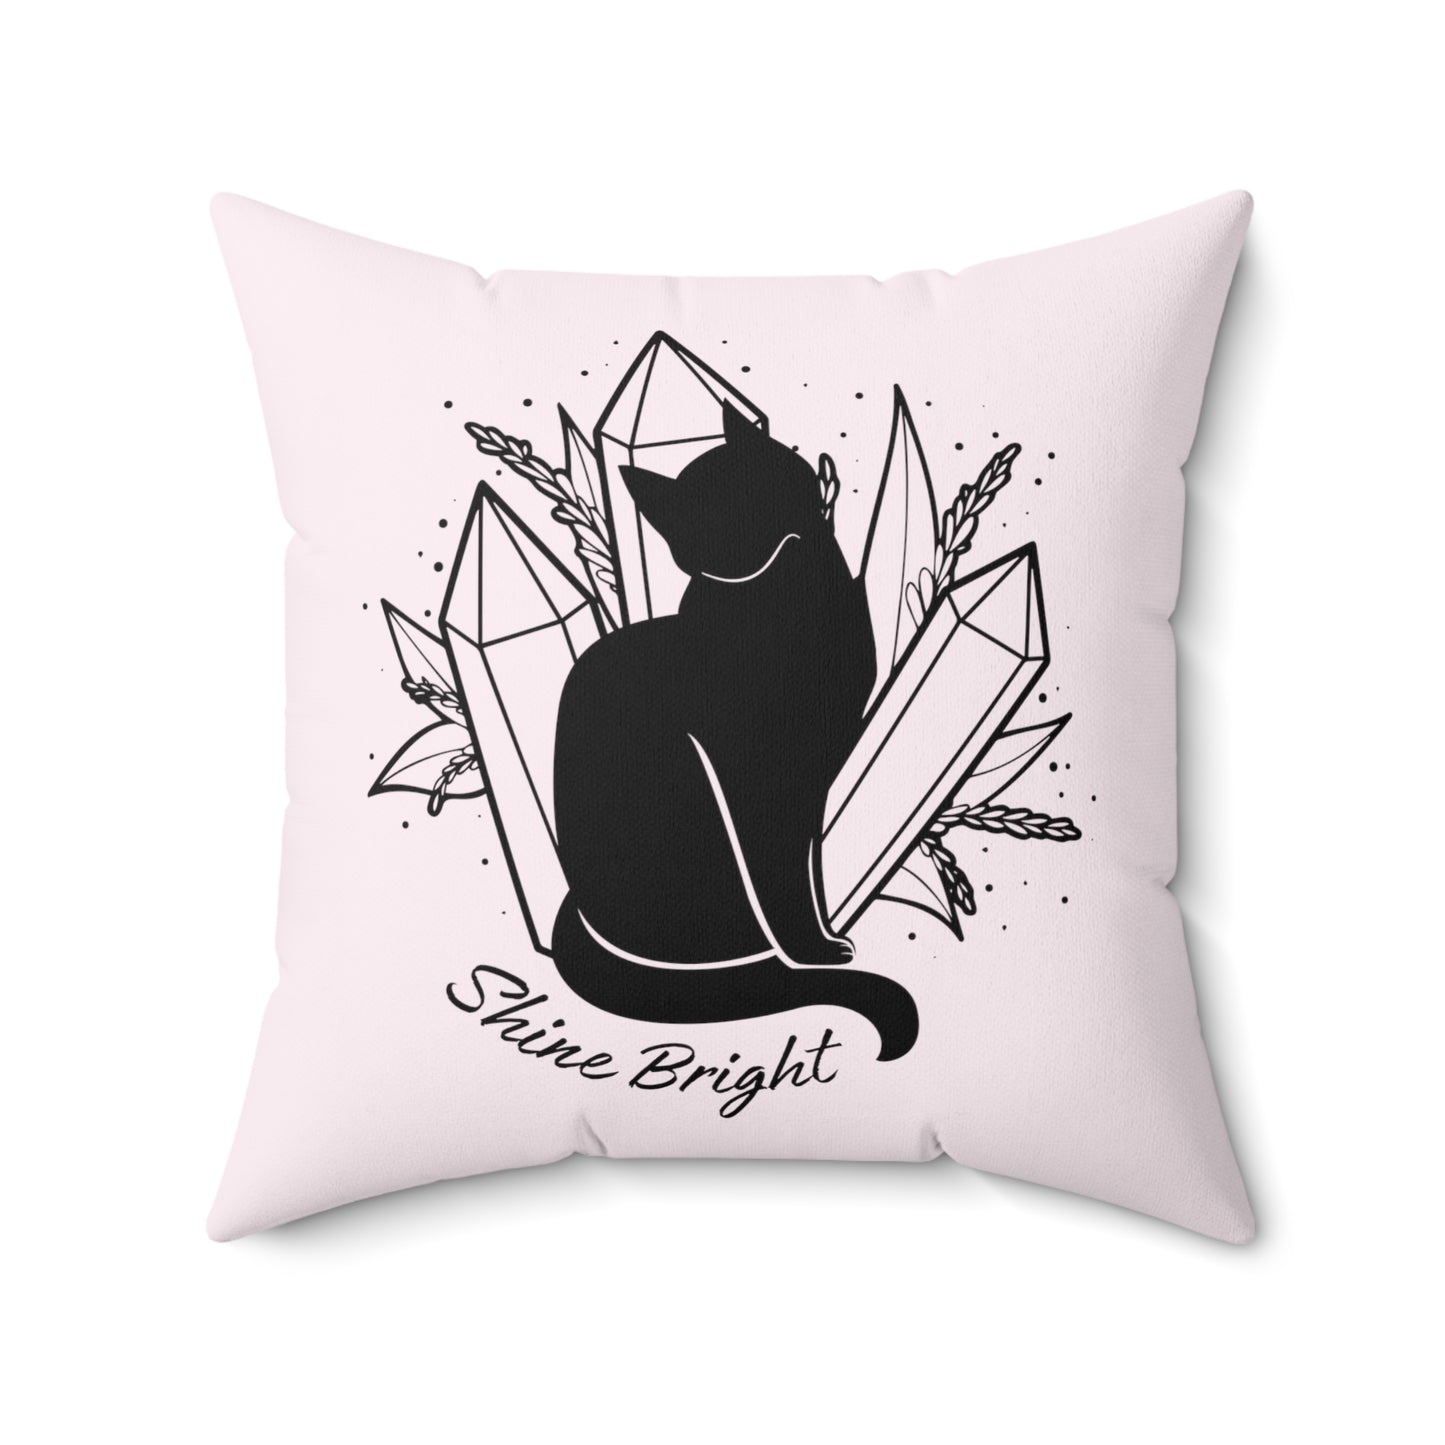 Witchy Crystals and Cat Square Pillow, Cute Black Cat Familiar Pillow, Whimsical cushion, Celestial home decor, Mystical Magical pillow